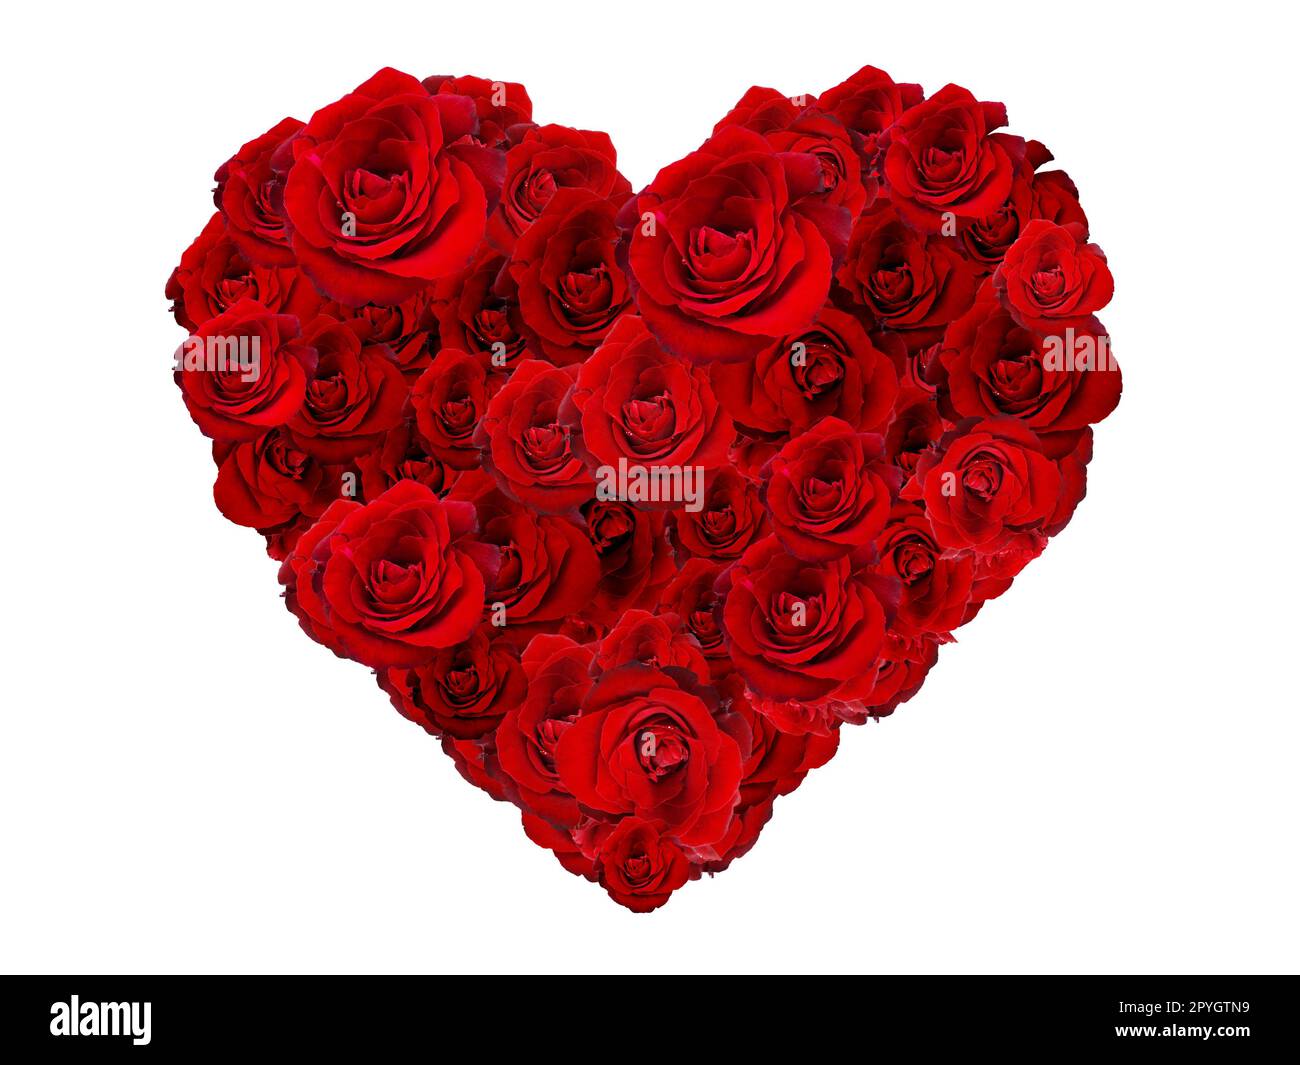 Valentines Day Heart Made of Red Roses Isolated on White Background Stock Photo